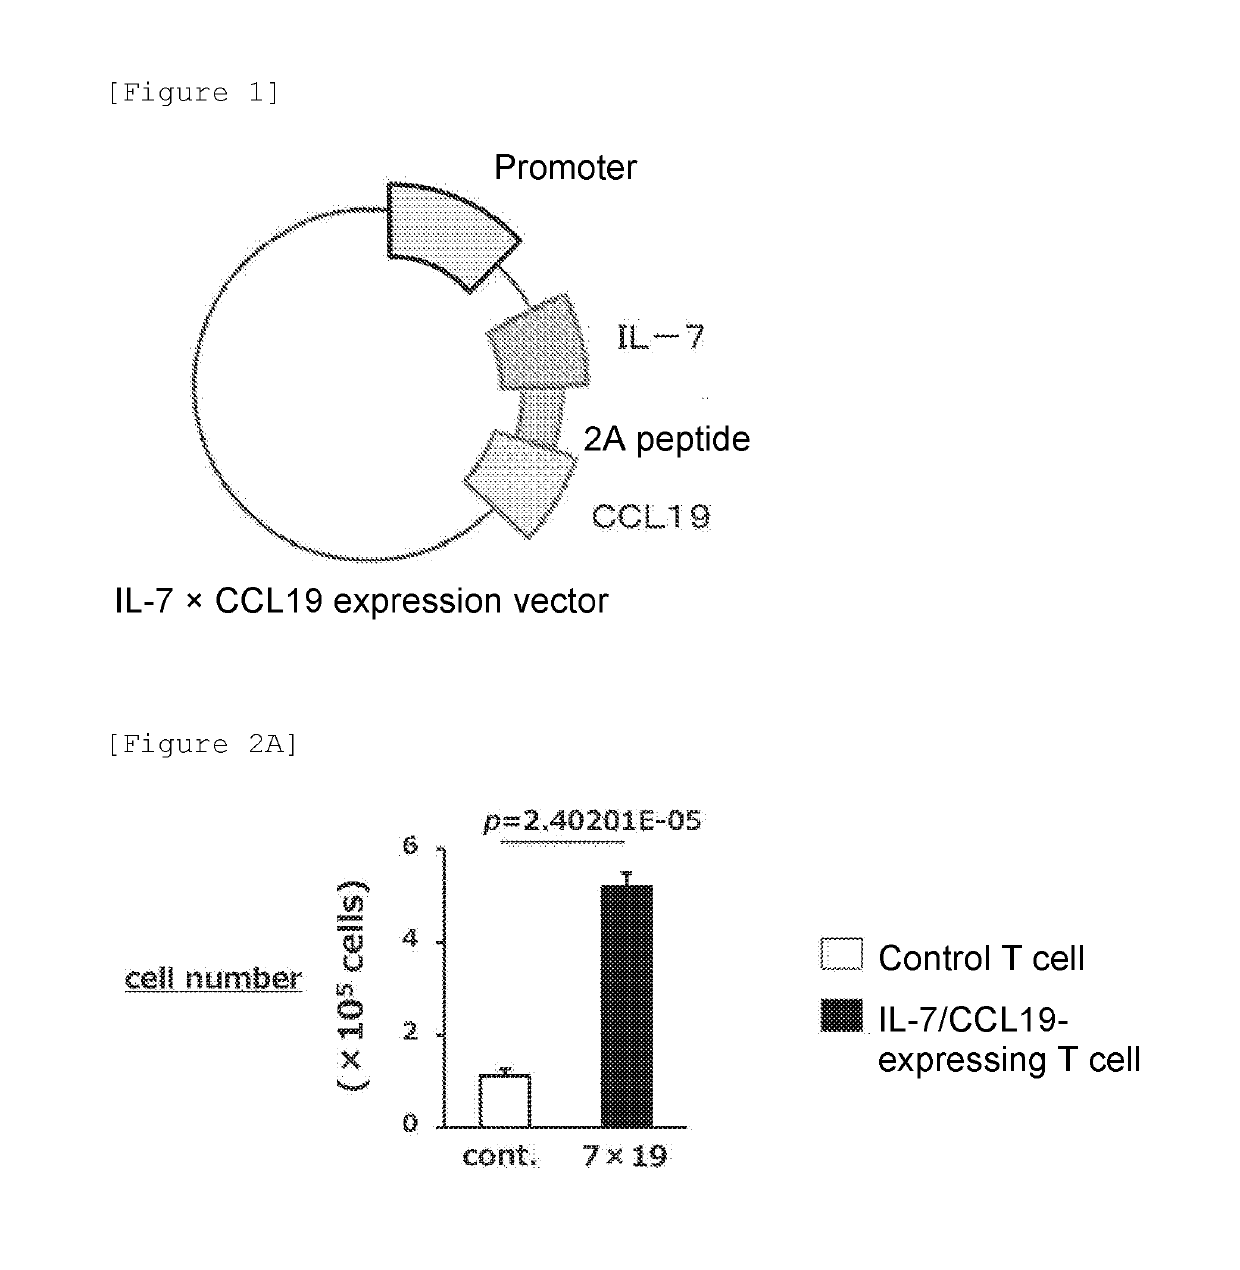 Immunocompetent cell and expression vector expressing regulatory factors of immune function